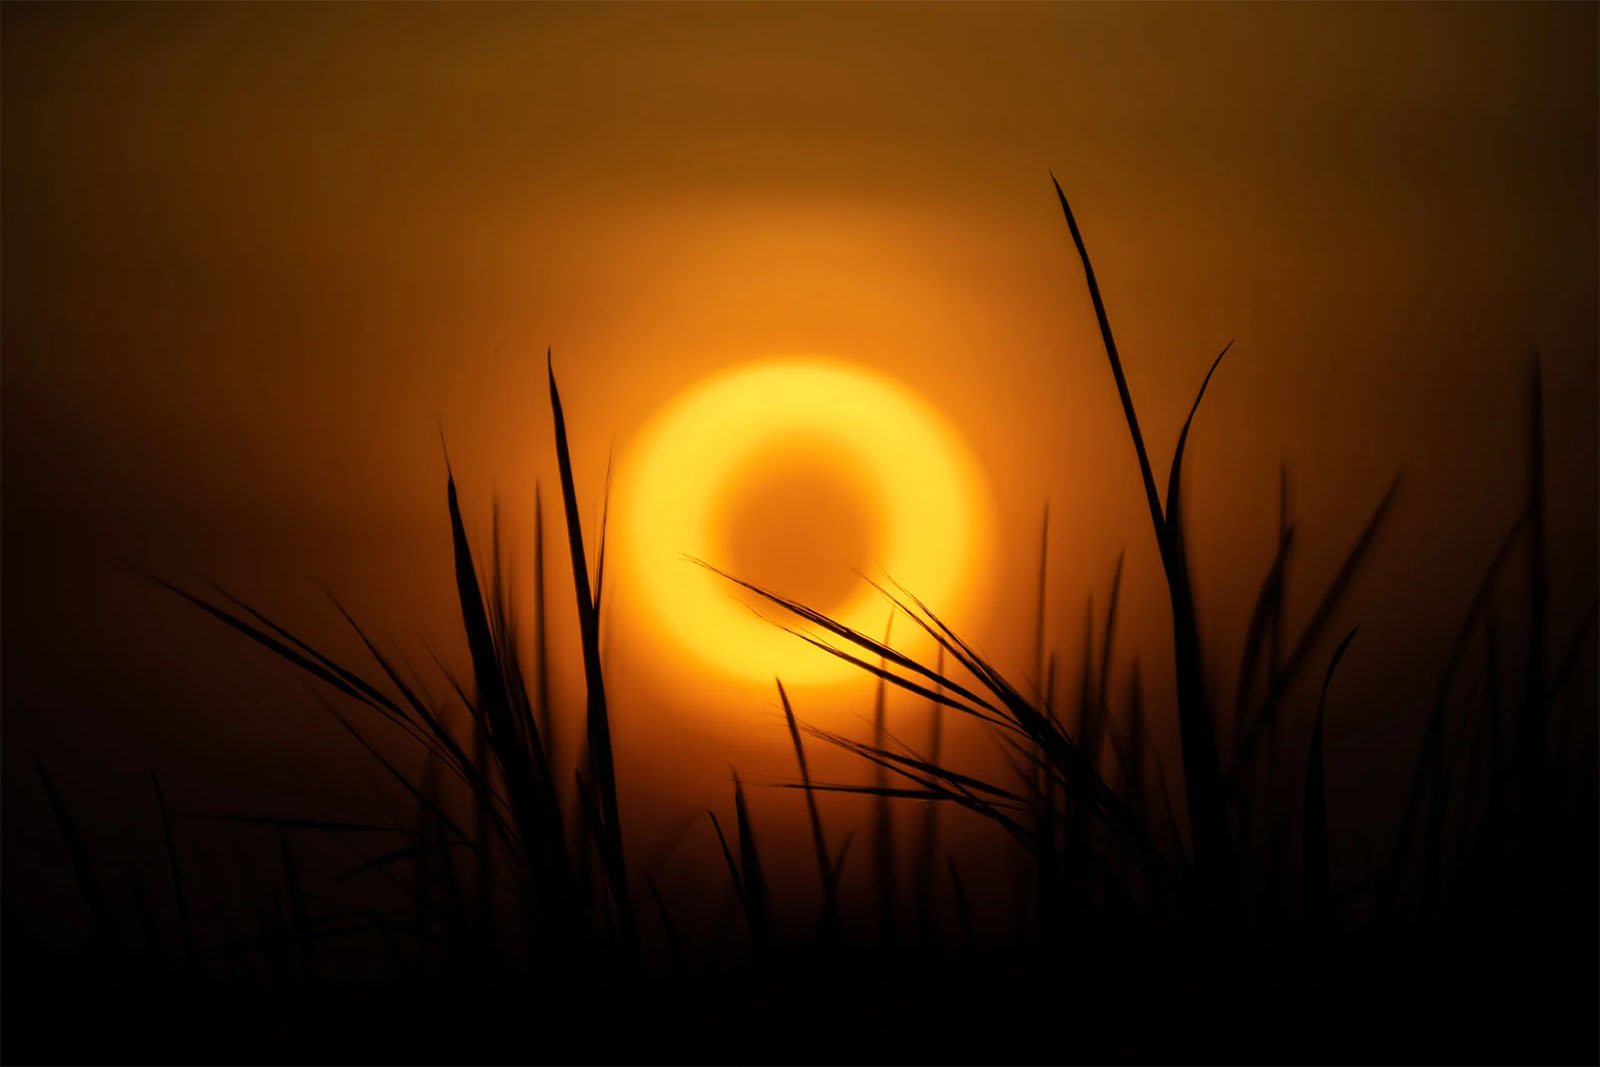 Silhouette of tall grass against a backdrop of a solar eclipse during sunset. The sun forms a bright ring, illuminating the sky with a warm, golden hue, creating a dramatic and serene scene.